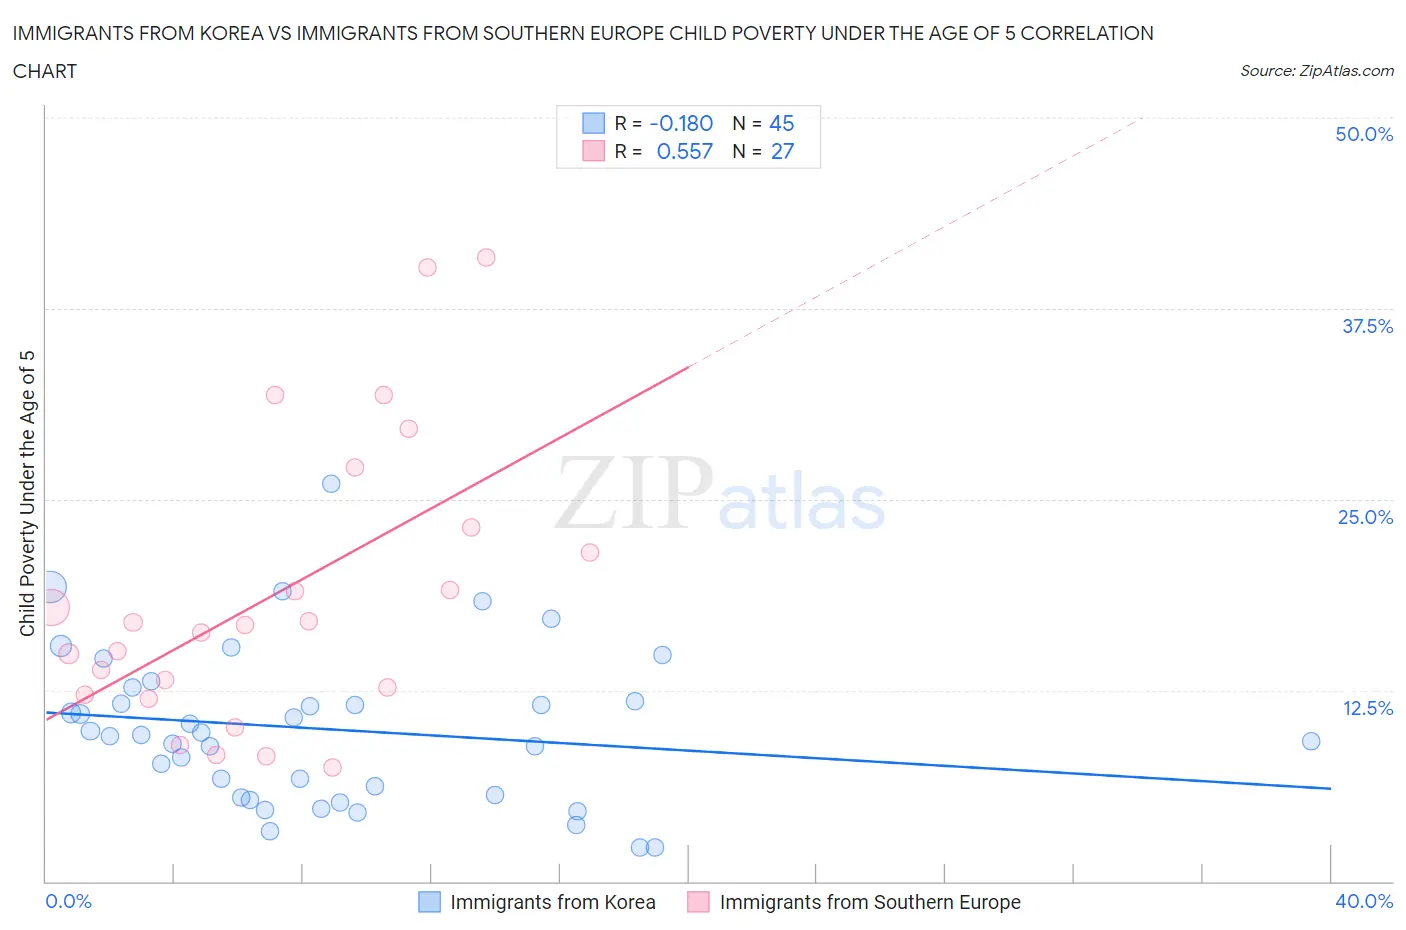 Immigrants from Korea vs Immigrants from Southern Europe Child Poverty Under the Age of 5